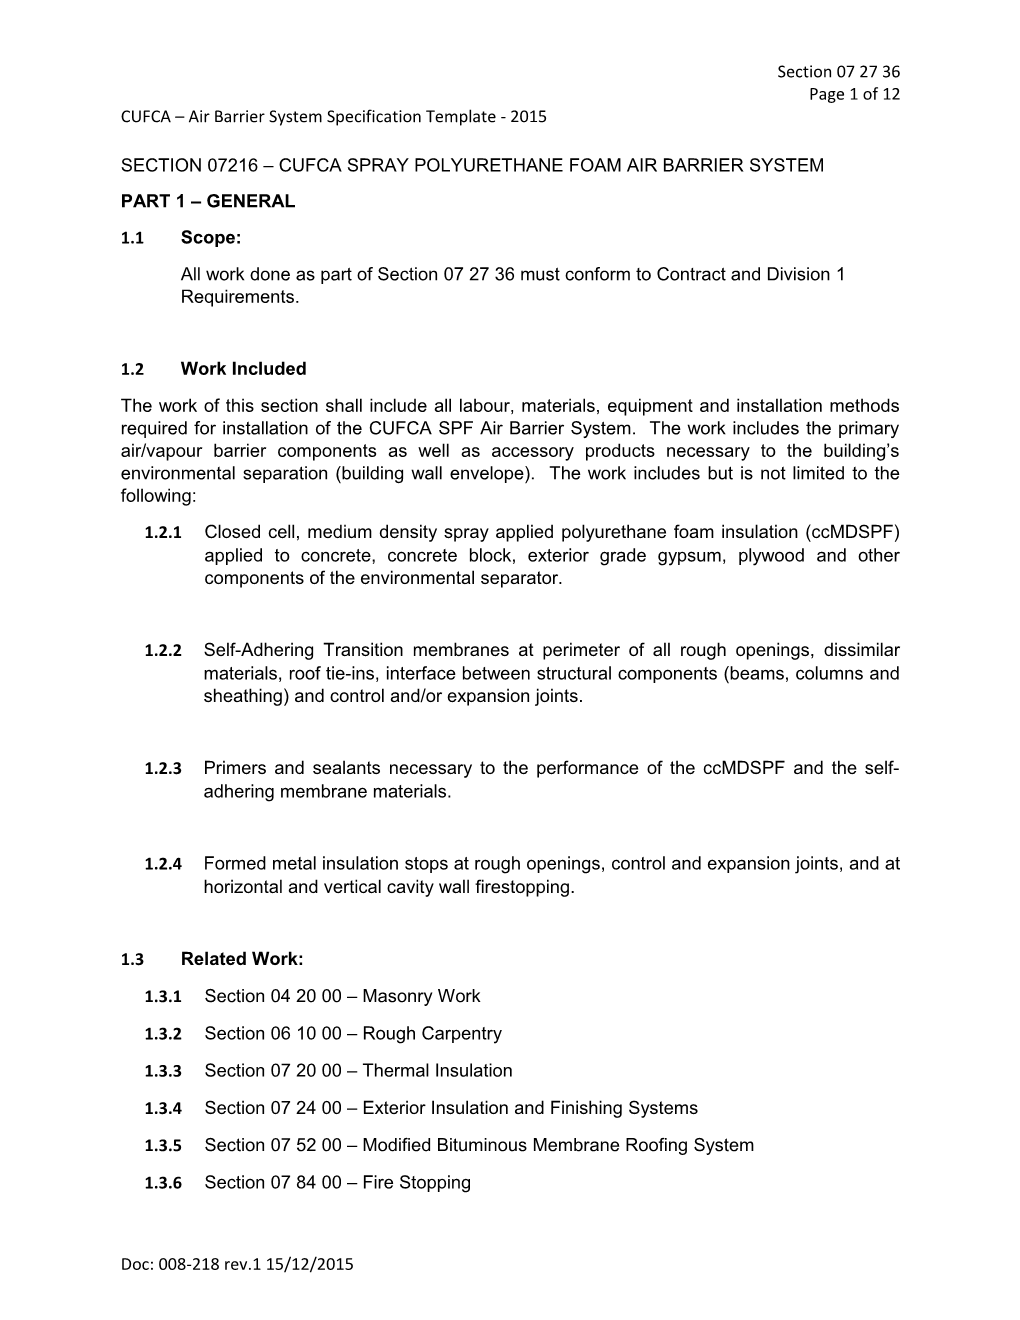 CUFCA Air Barrier System Specification Template - 2015